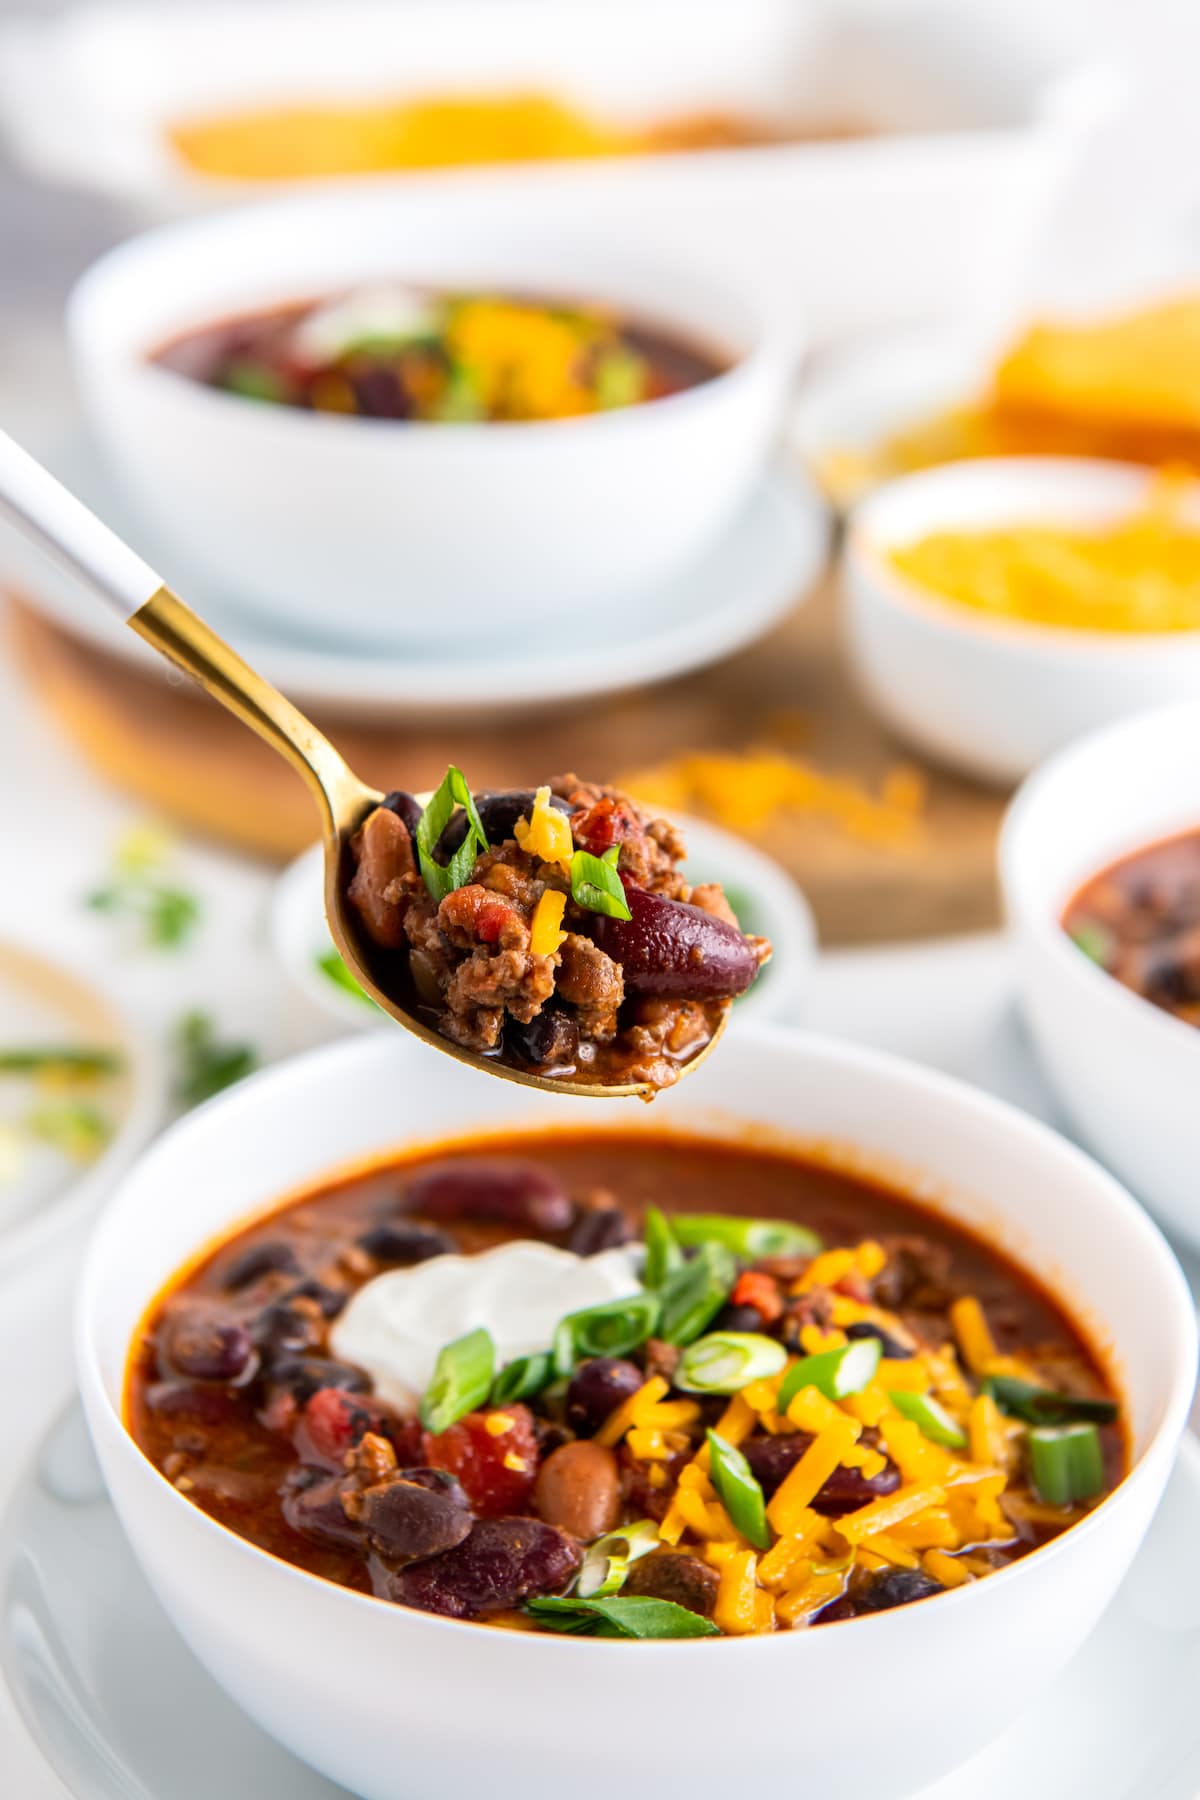 a spoon taking a bite out of a bowl of chili